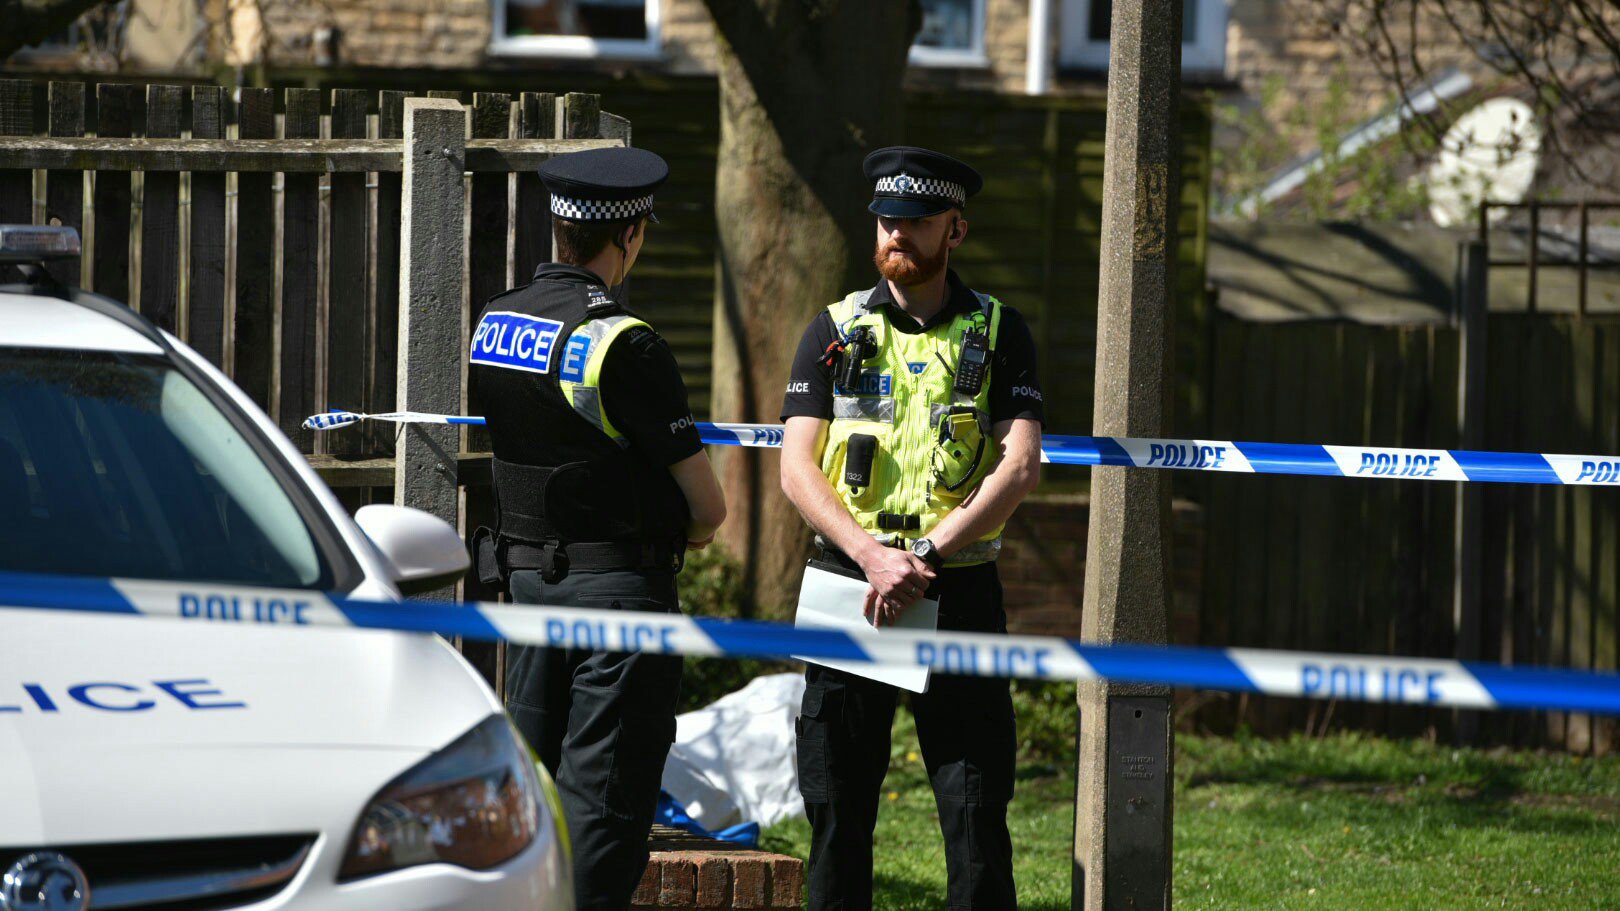 Police said officers will be conducting house to house enquires in the area. Photo: Steve Smailes for The Lincolnite